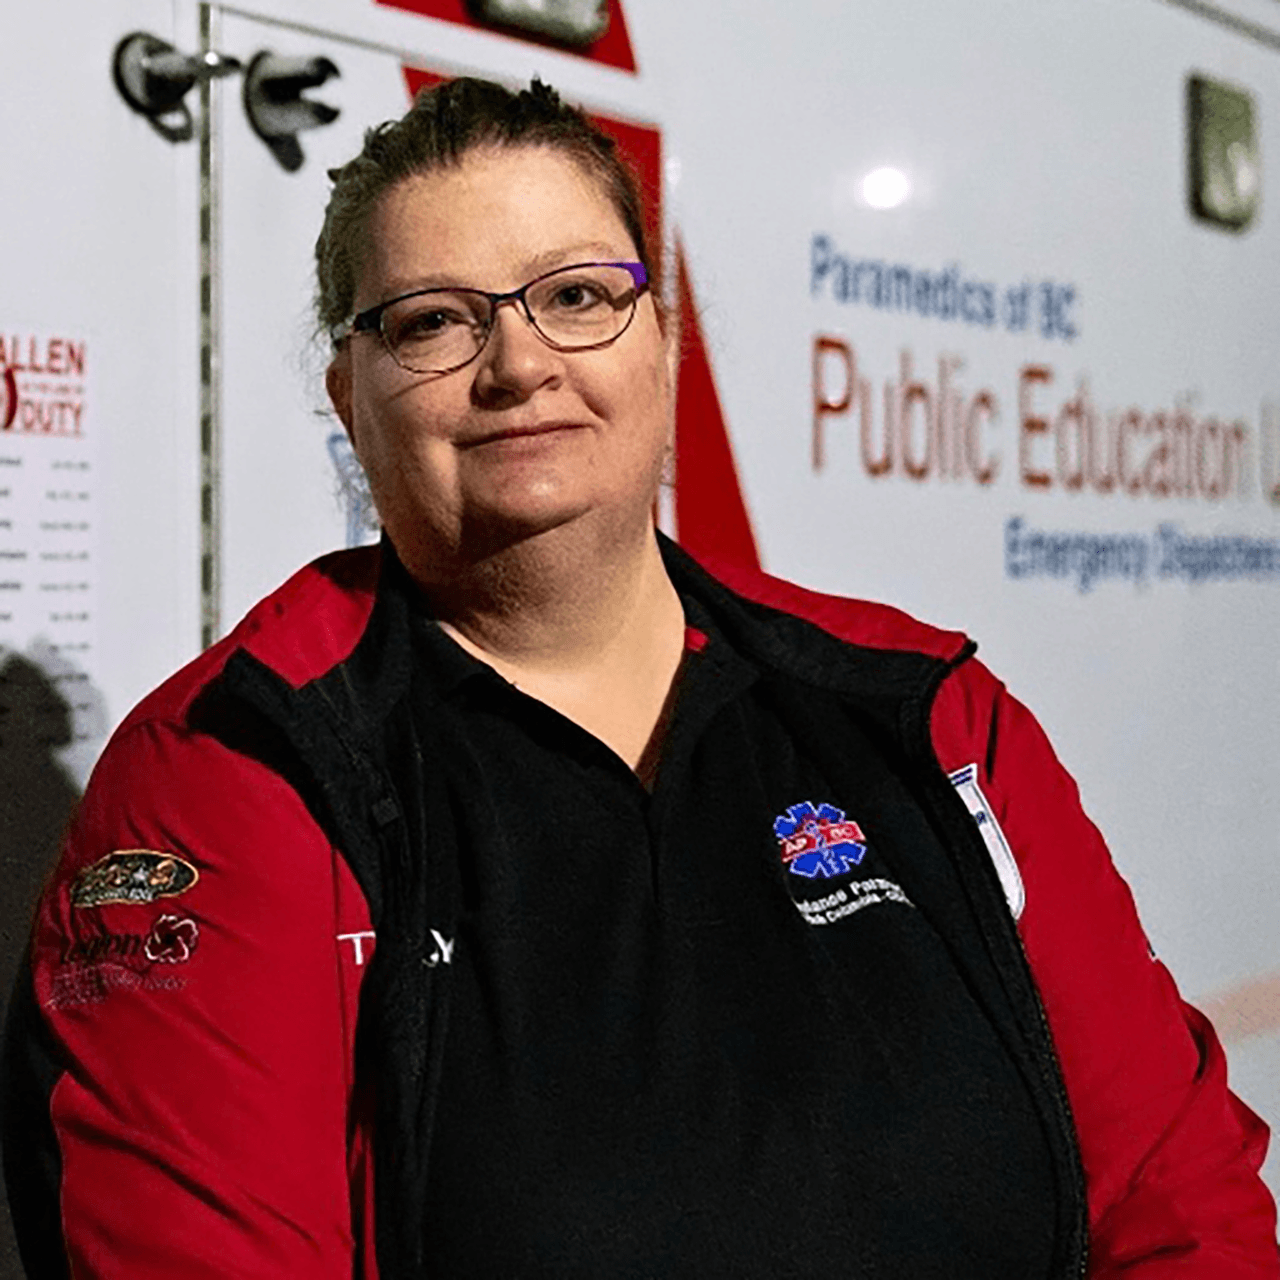 Aggie Pringle, Paramedic Support